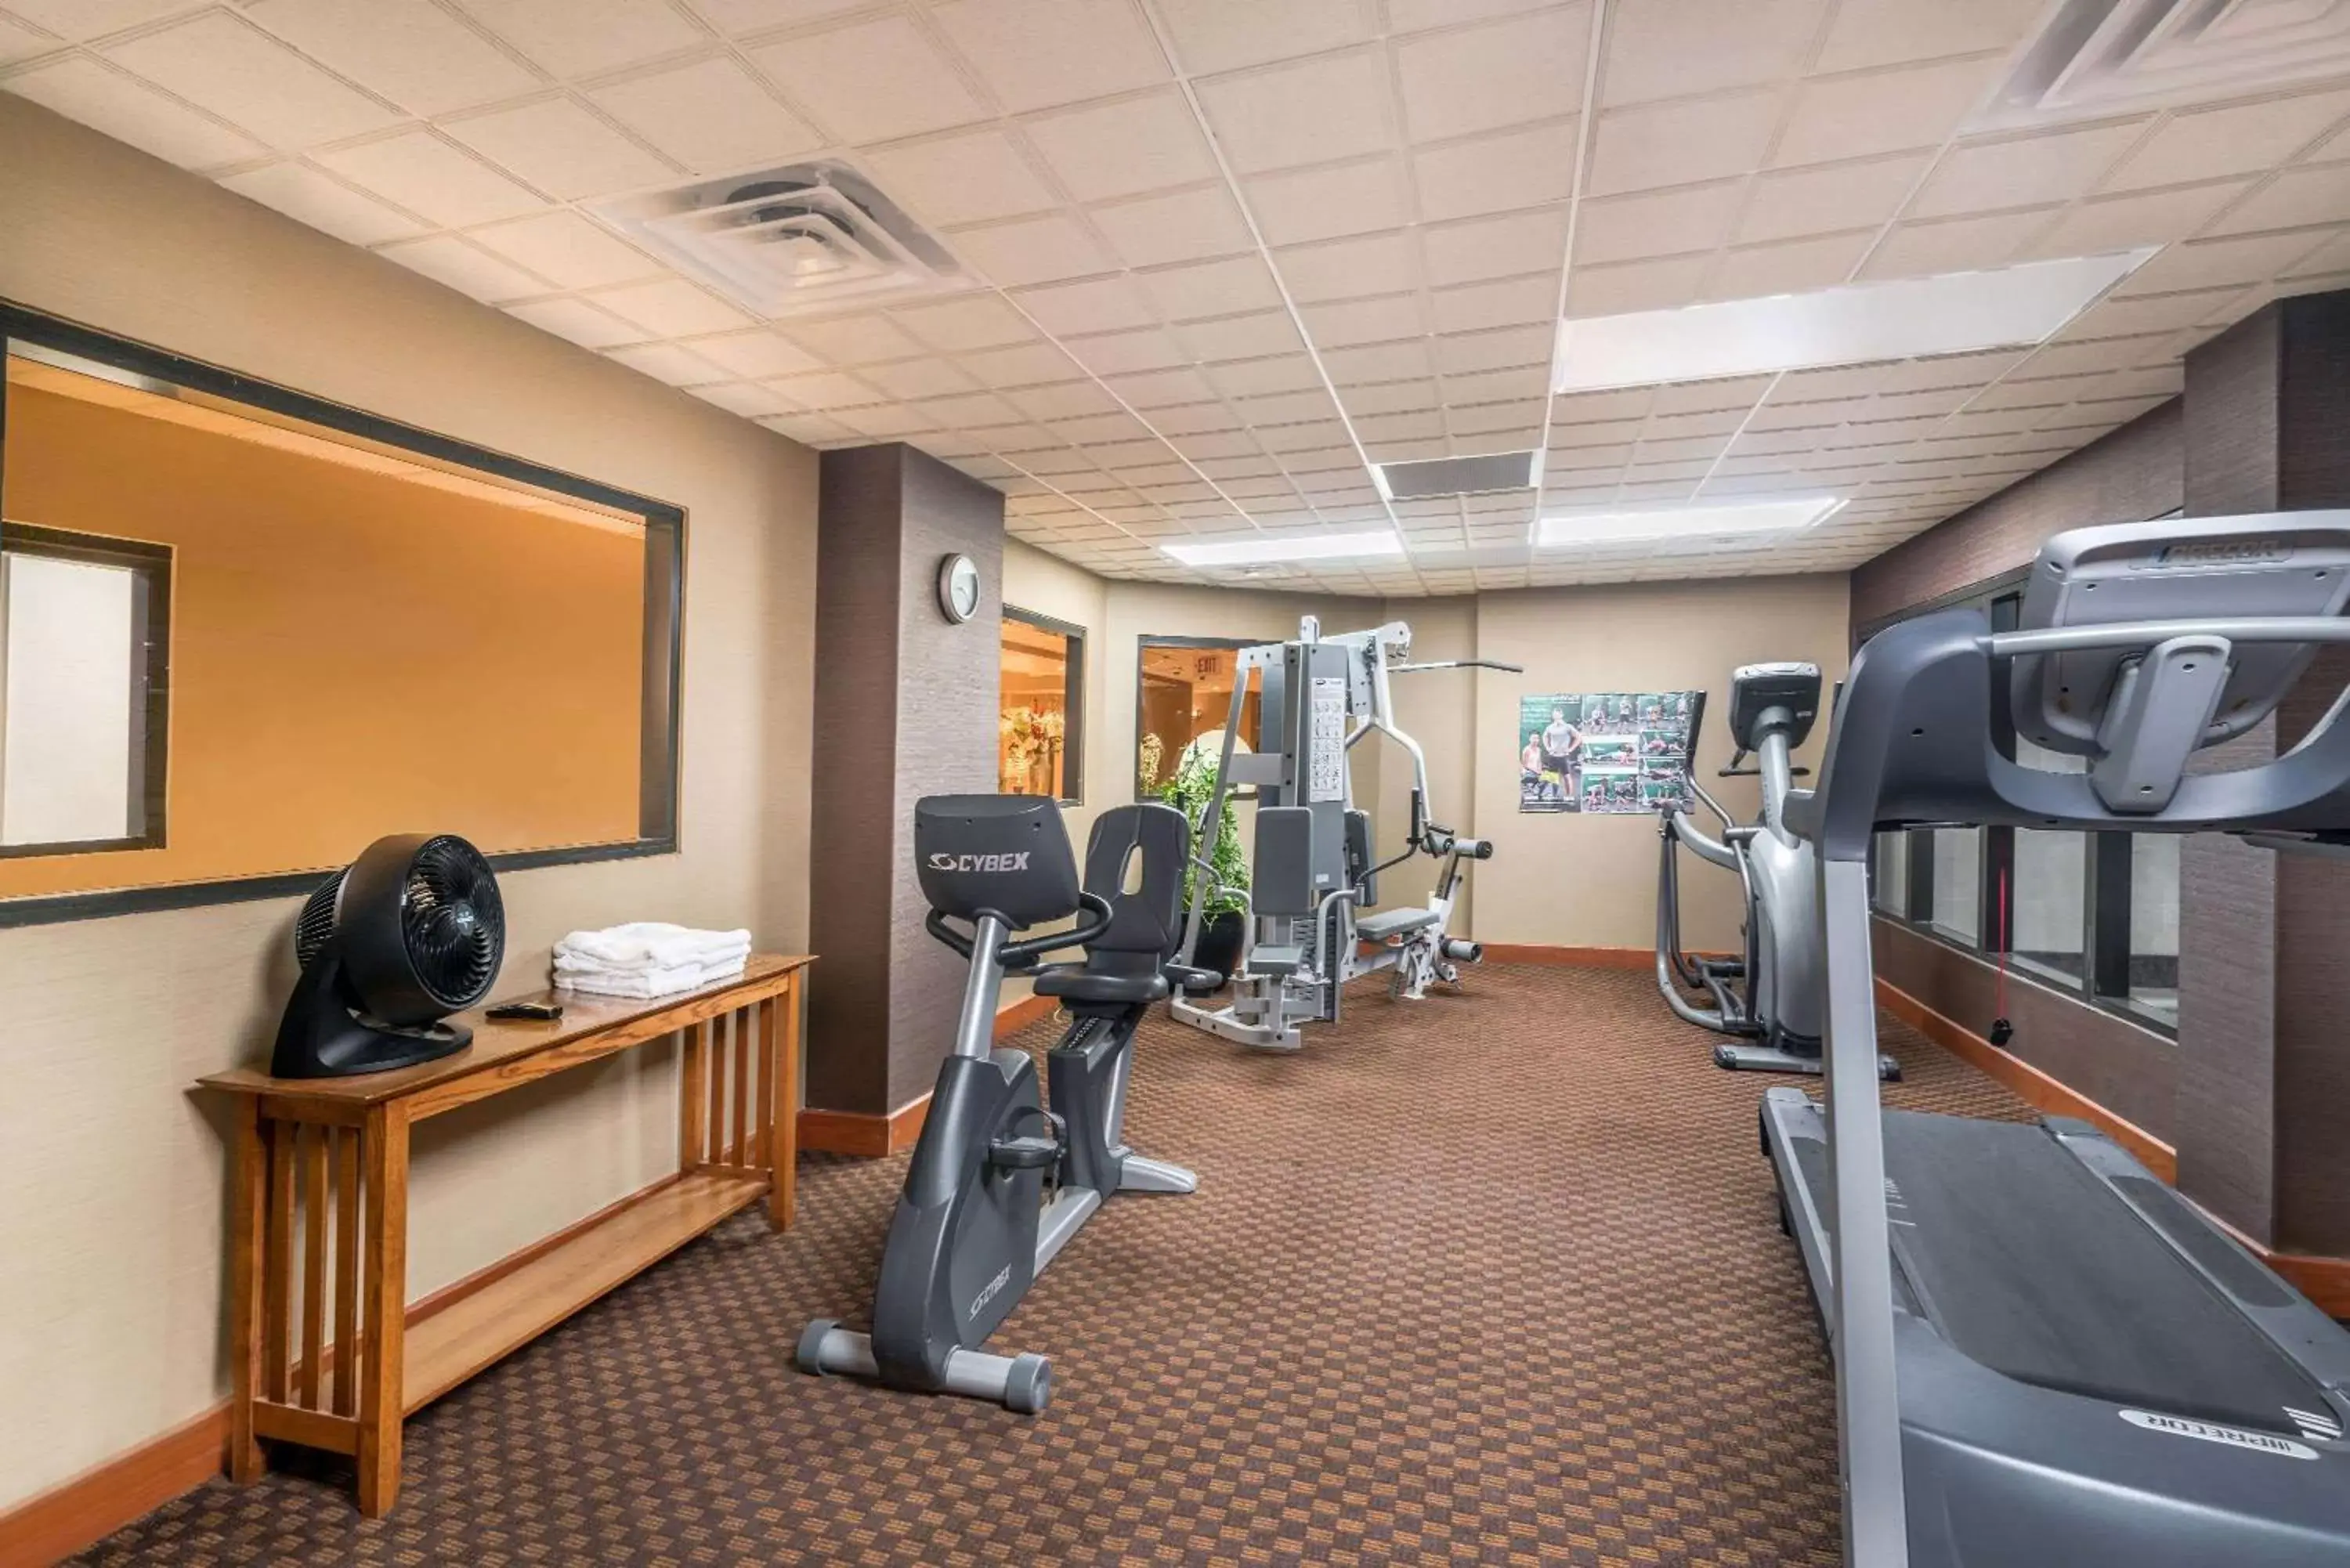 Fitness centre/facilities, Fitness Center/Facilities in Wingate by Wyndham (Lexington, VA)